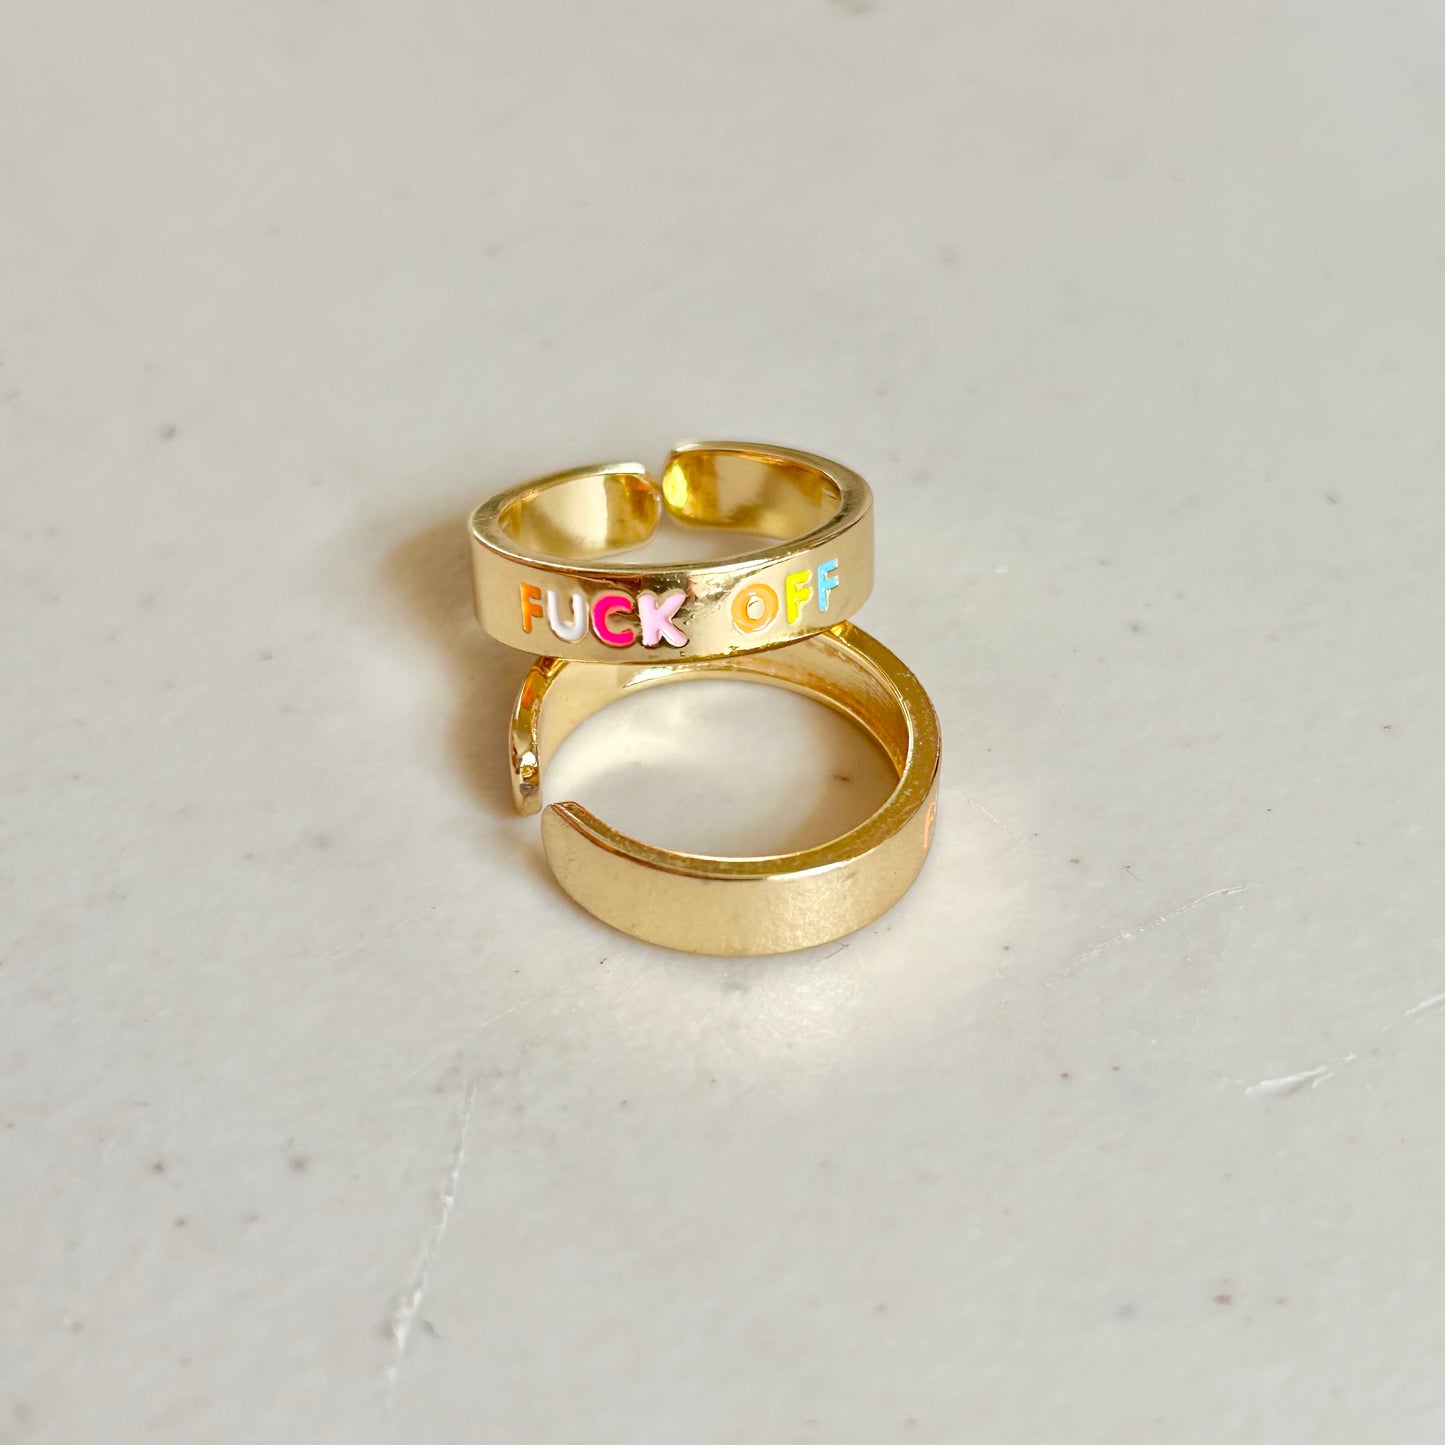 Fuck Off Adjustable Gold Ring